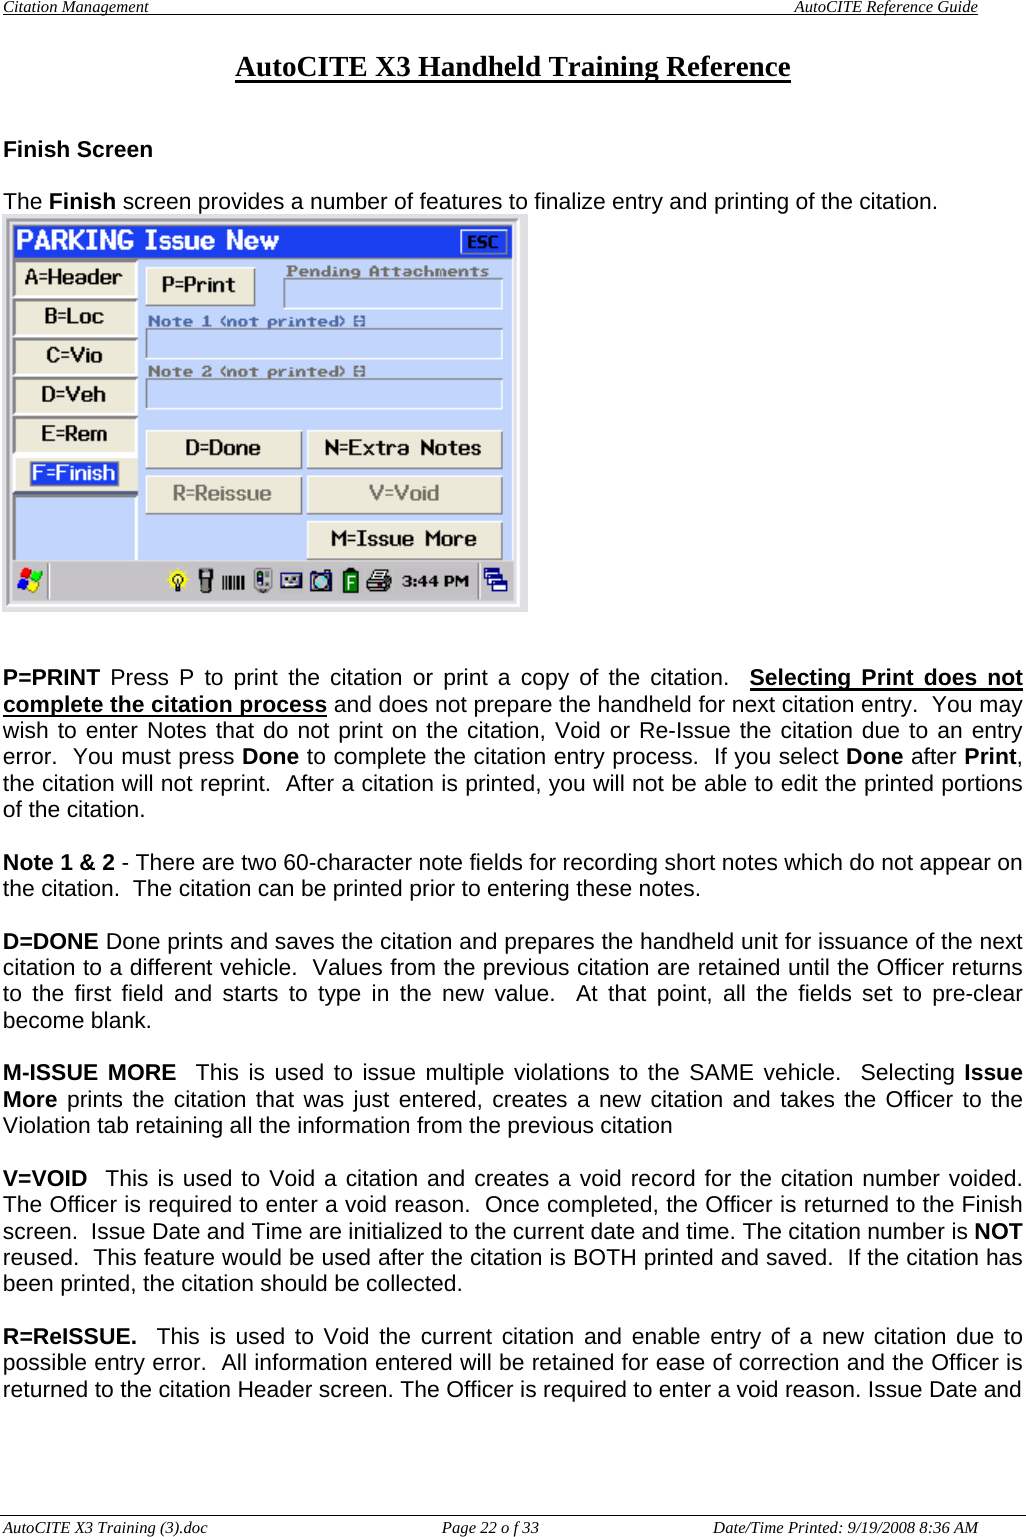 Citation Management    AutoCITE Reference Guide  AutoCITE X3 Handheld Training Reference AutoCITE X3 Training (3).doc  Page 22 o f 33  Date/Time Printed: 9/19/2008 8:36 AM Finish Screen  The Finish screen provides a number of features to finalize entry and printing of the citation.    P=PRINT Press P to print the citation or print a copy of the citation.  Selecting Print does not complete the citation process and does not prepare the handheld for next citation entry.  You may wish to enter Notes that do not print on the citation, Void or Re-Issue the citation due to an entry error.  You must press Done to complete the citation entry process.  If you select Done after Print, the citation will not reprint.  After a citation is printed, you will not be able to edit the printed portions of the citation.  Note 1 &amp; 2 - There are two 60-character note fields for recording short notes which do not appear on the citation.  The citation can be printed prior to entering these notes.  D=DONE Done prints and saves the citation and prepares the handheld unit for issuance of the next citation to a different vehicle.  Values from the previous citation are retained until the Officer returns to the first field and starts to type in the new value.  At that point, all the fields set to pre-clear become blank.  M-ISSUE MORE  This is used to issue multiple violations to the SAME vehicle.  Selecting Issue More prints the citation that was just entered, creates a new citation and takes the Officer to the Violation tab retaining all the information from the previous citation  V=VOID  This is used to Void a citation and creates a void record for the citation number voided.  The Officer is required to enter a void reason.  Once completed, the Officer is returned to the Finish screen.  Issue Date and Time are initialized to the current date and time. The citation number is NOT reused.  This feature would be used after the citation is BOTH printed and saved.  If the citation has been printed, the citation should be collected.    R=ReISSUE.  This is used to Void the current citation and enable entry of a new citation due to possible entry error.  All information entered will be retained for ease of correction and the Officer is returned to the citation Header screen. The Officer is required to enter a void reason. Issue Date and    